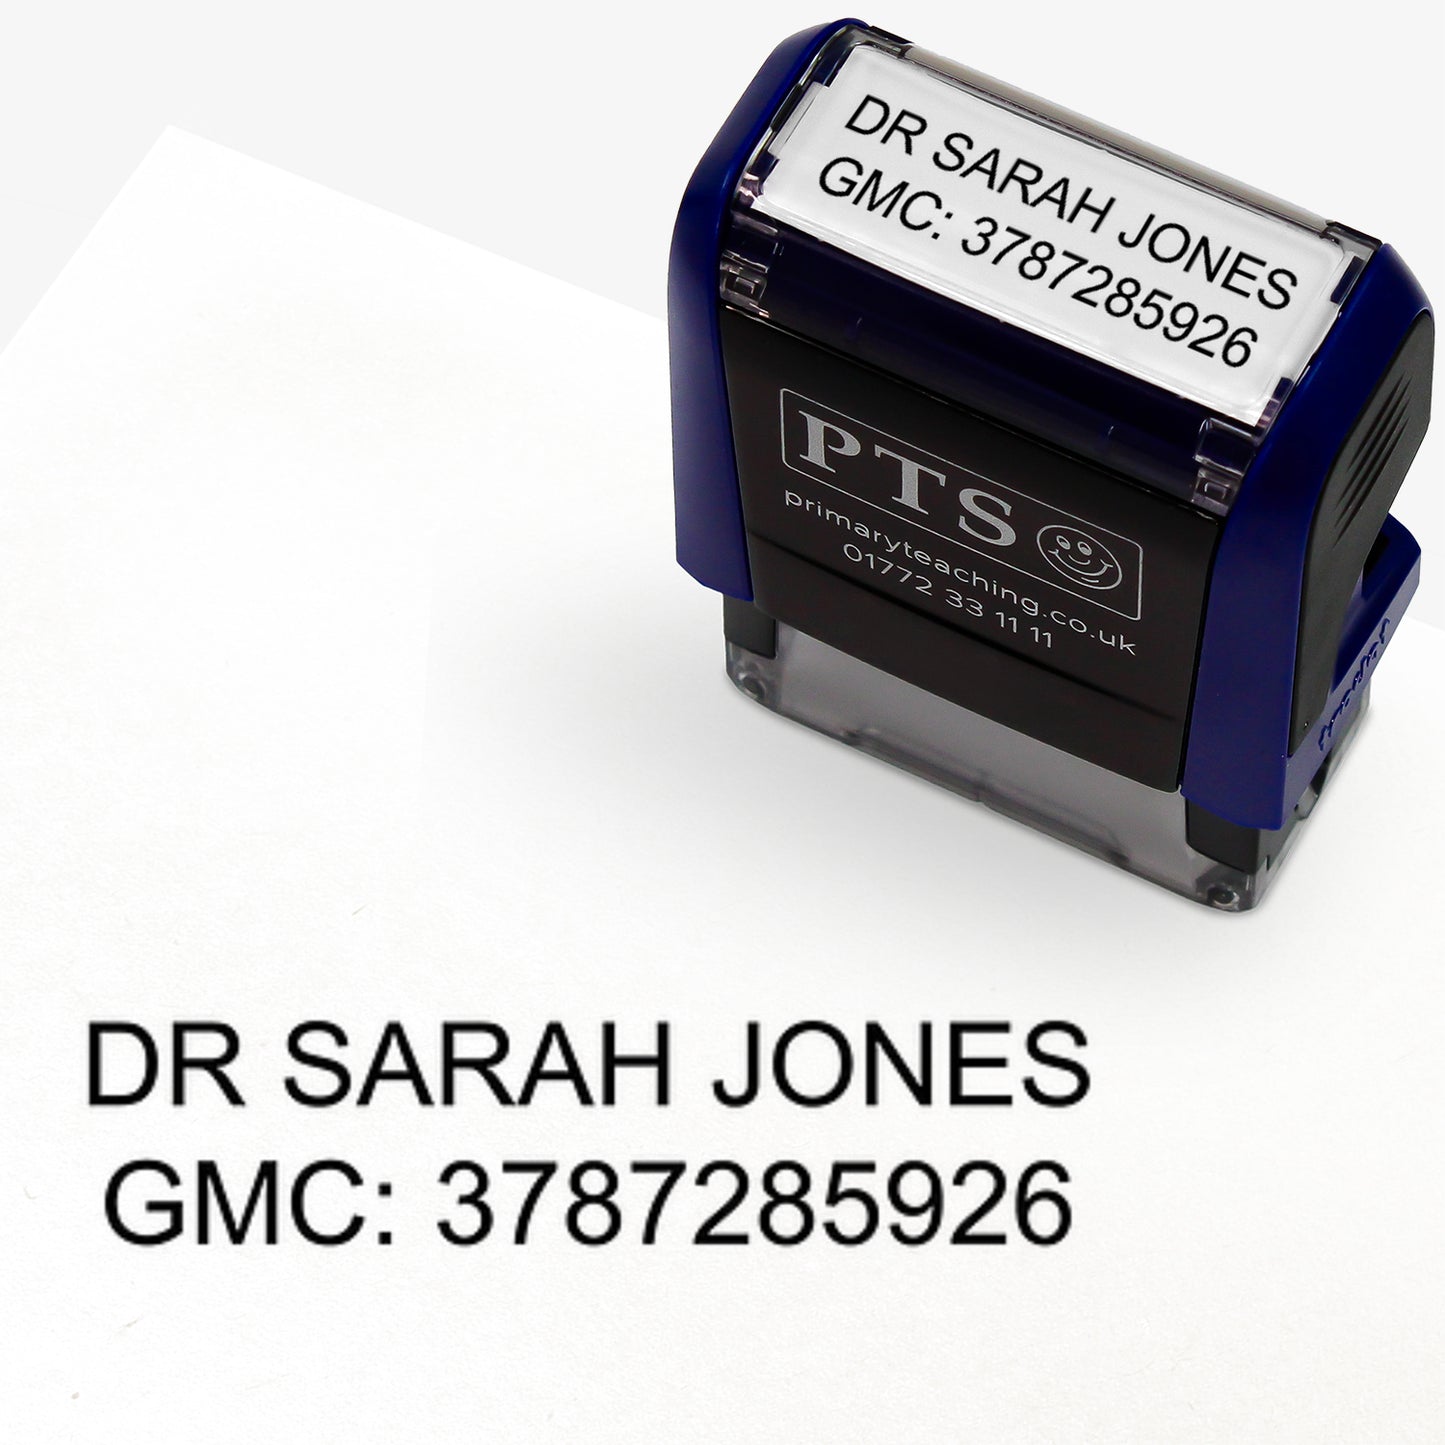 Personalised Healthcare Professional Stamper - 38 x 14mm